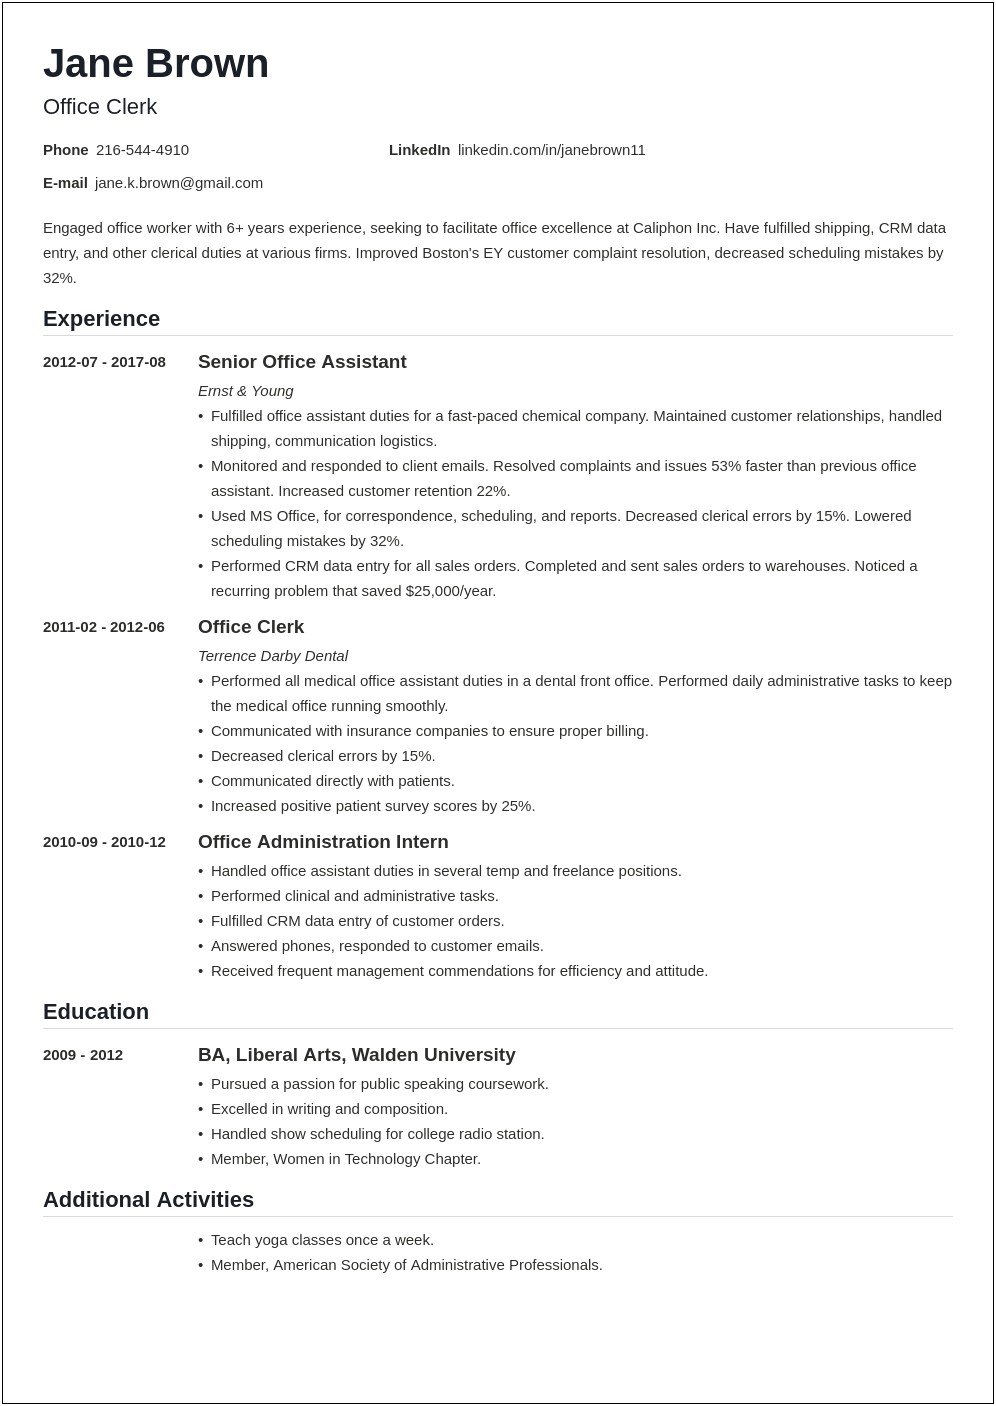 Free Sample Resume For Clerical Position